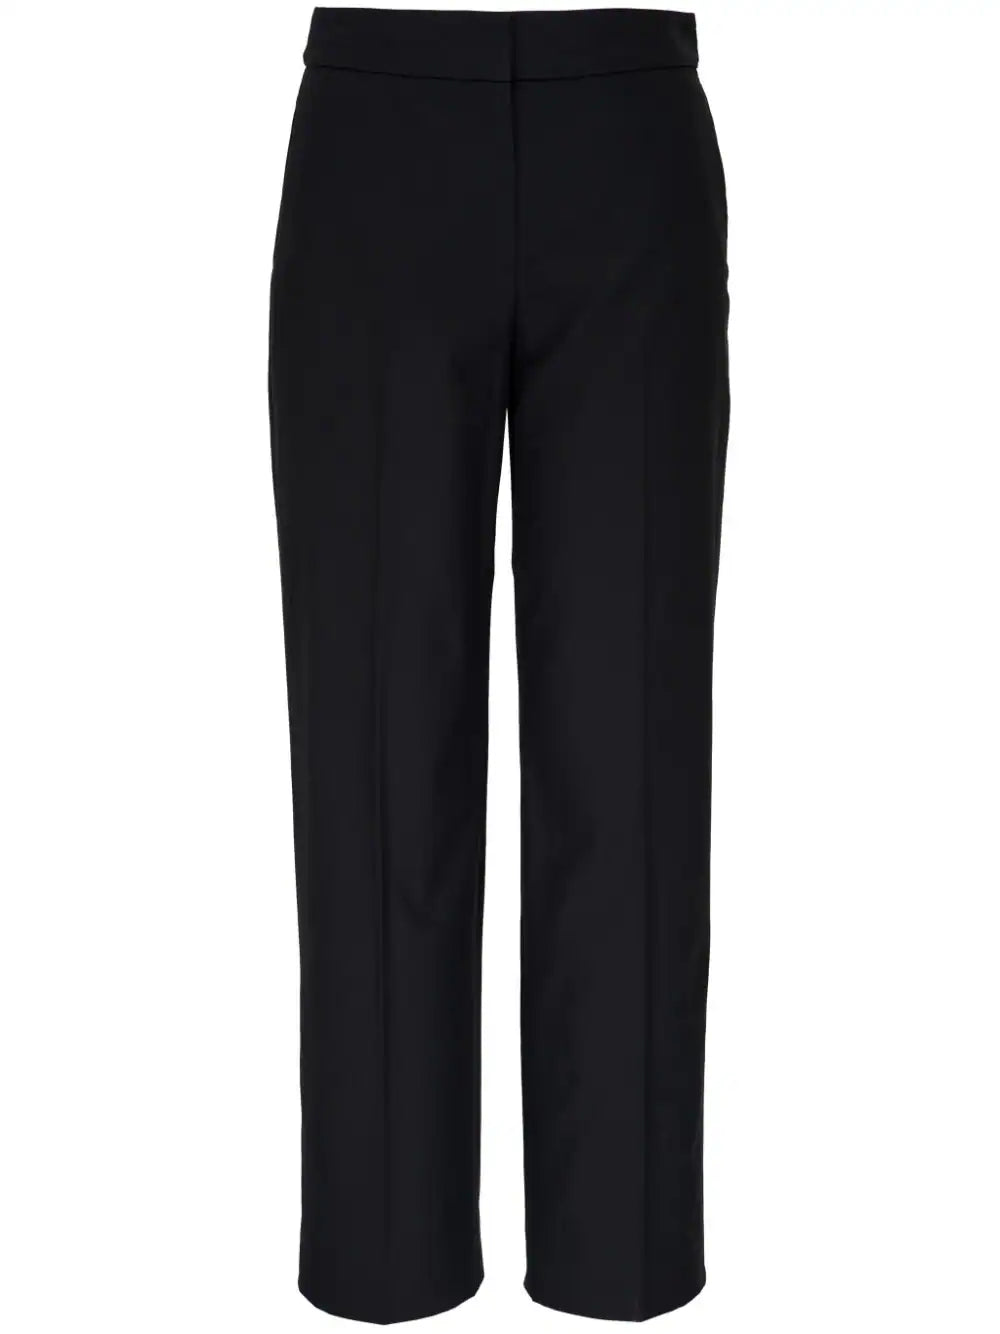 Nohan Pant in Black